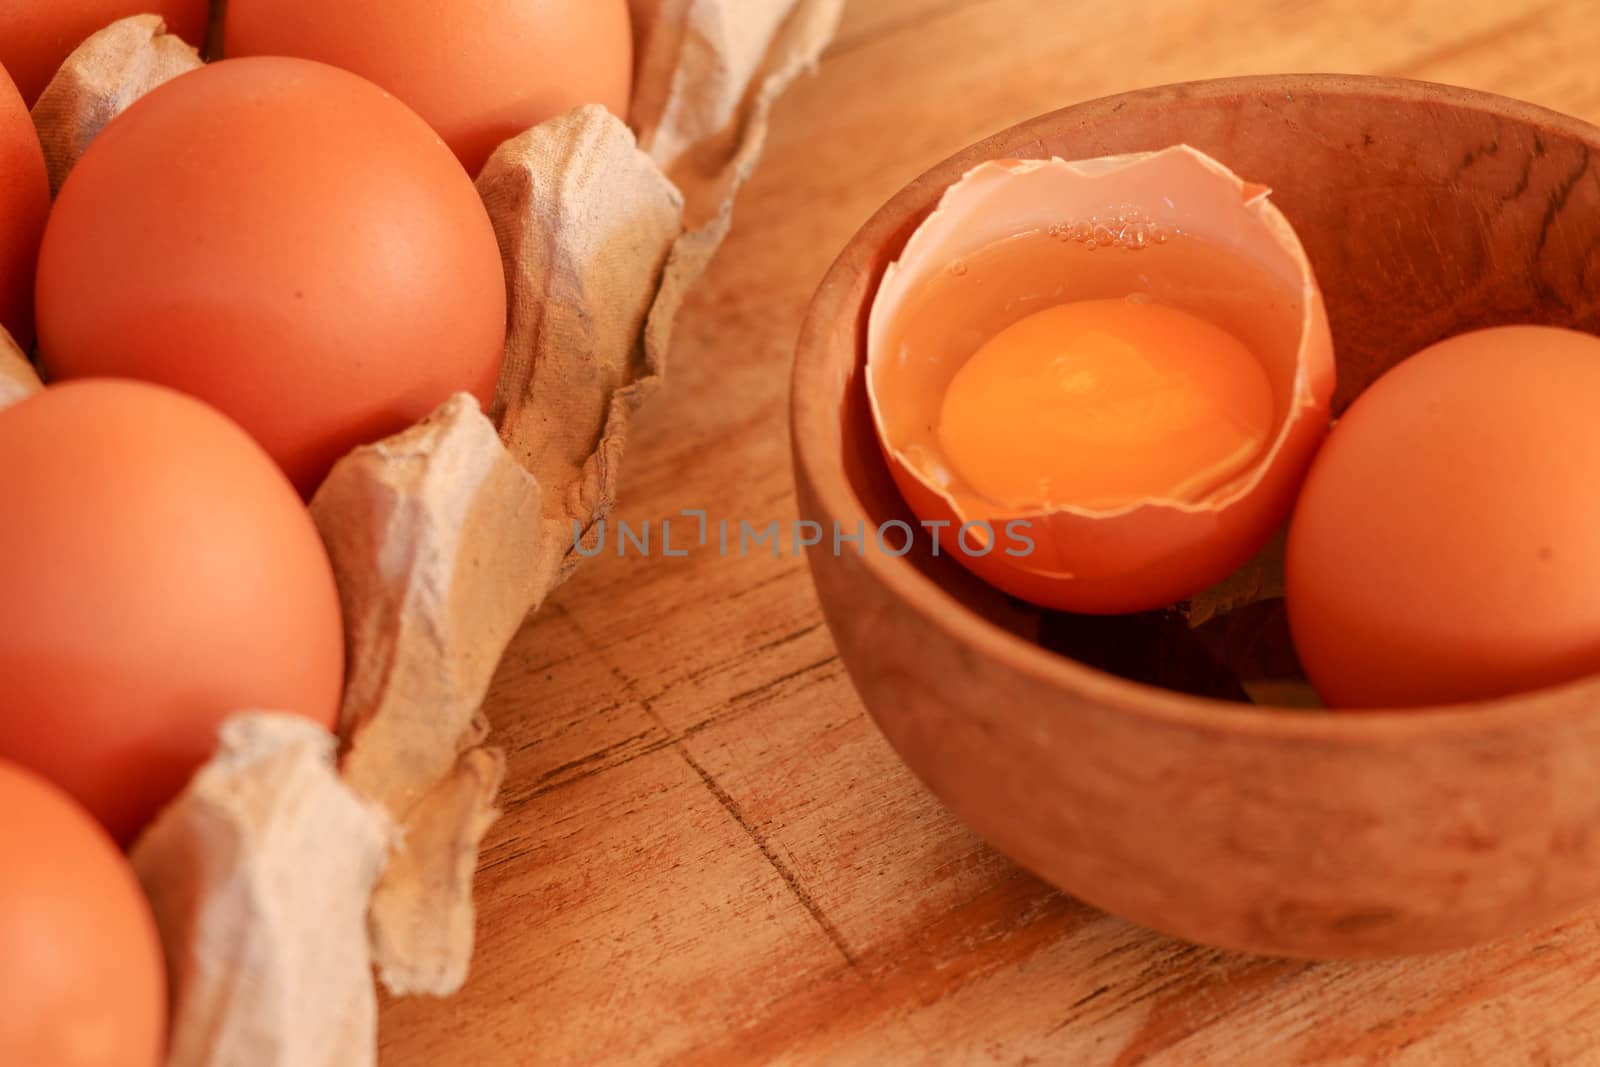 Cracked egg in bowl and egg shells on wooden table.